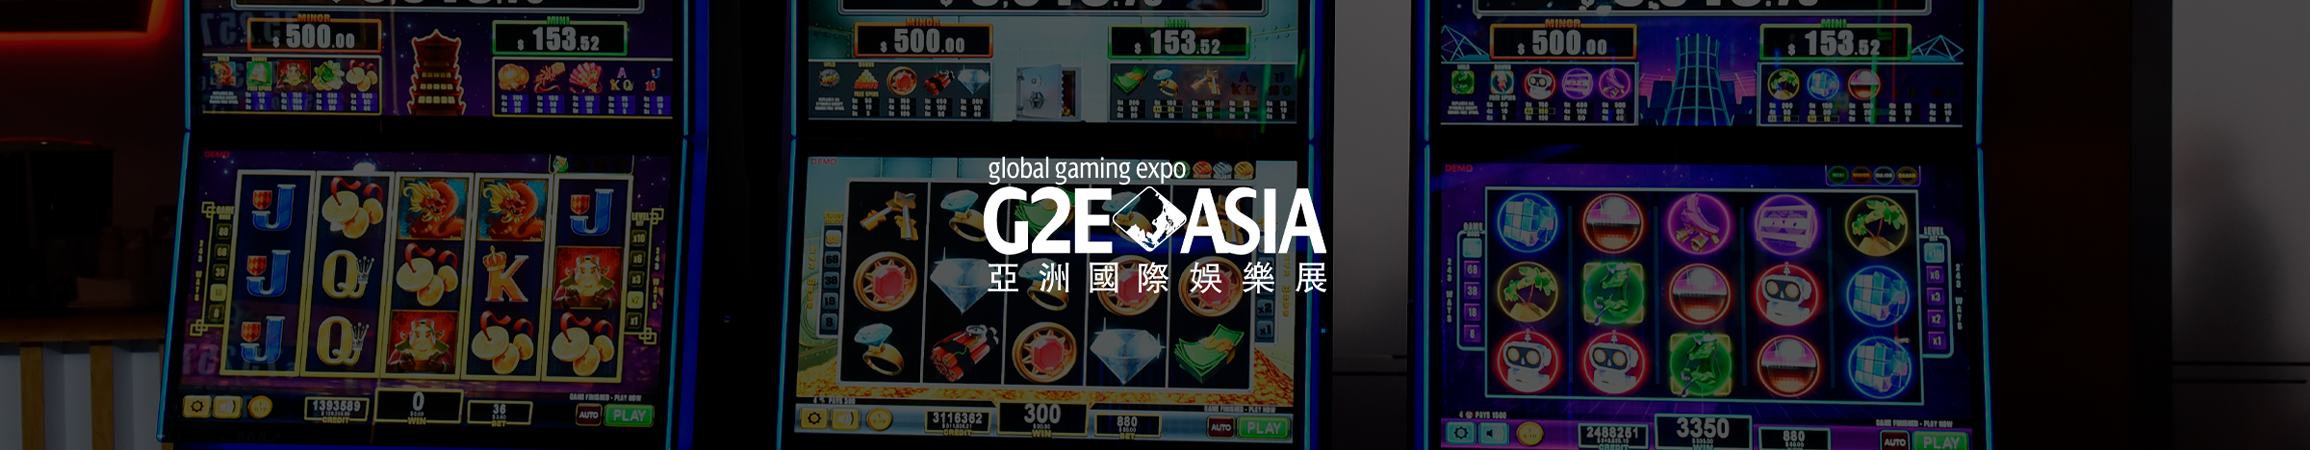 FBM observes its best G2E Asia for years